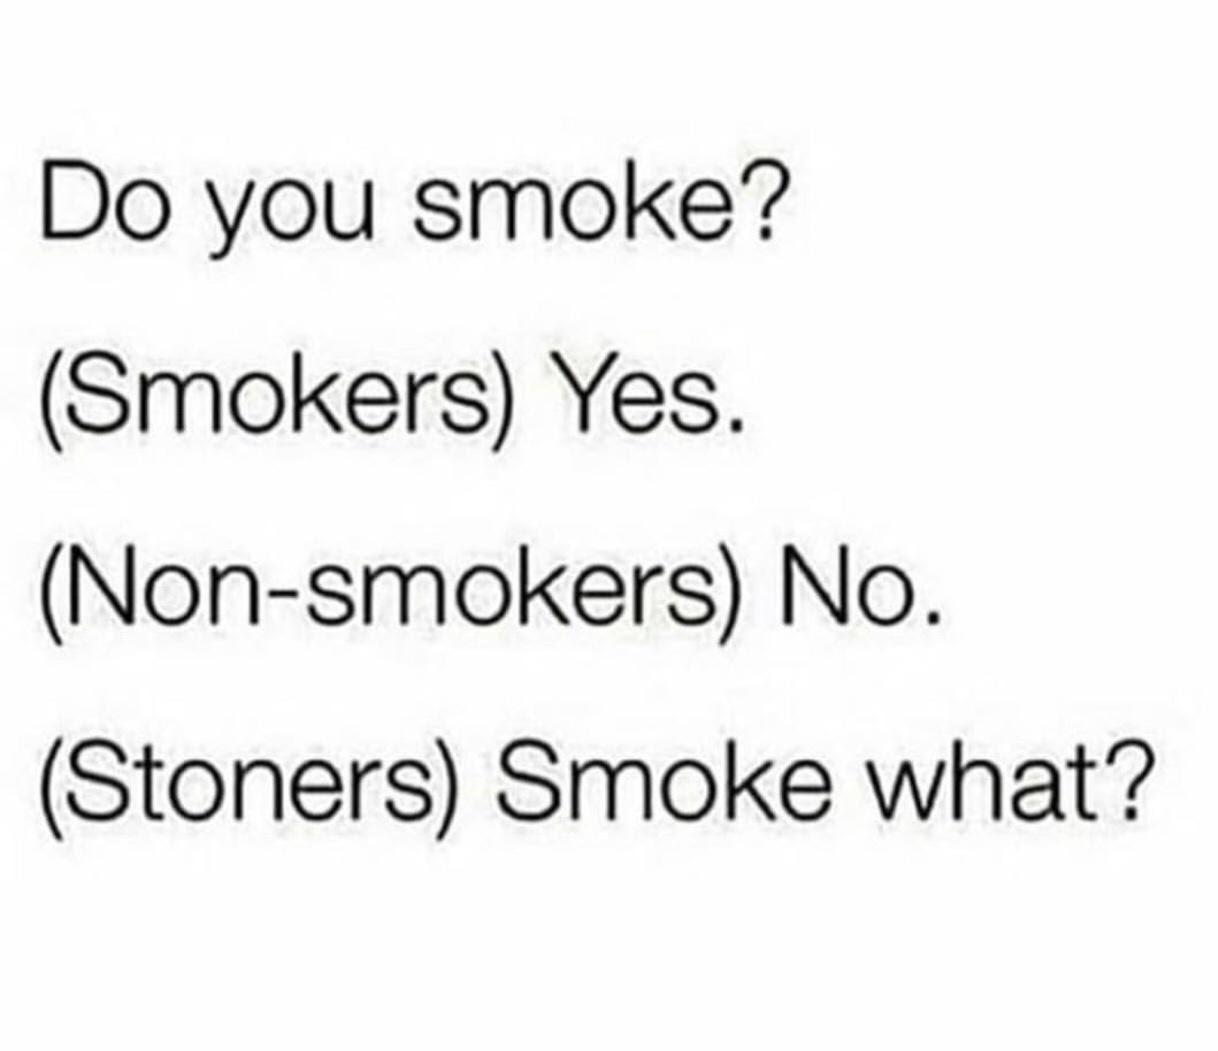 funny memems and tweetsdid we become friends quotes - Do you smoke? Smokers Yes. Nonsmokers No. Stoners Smoke what?